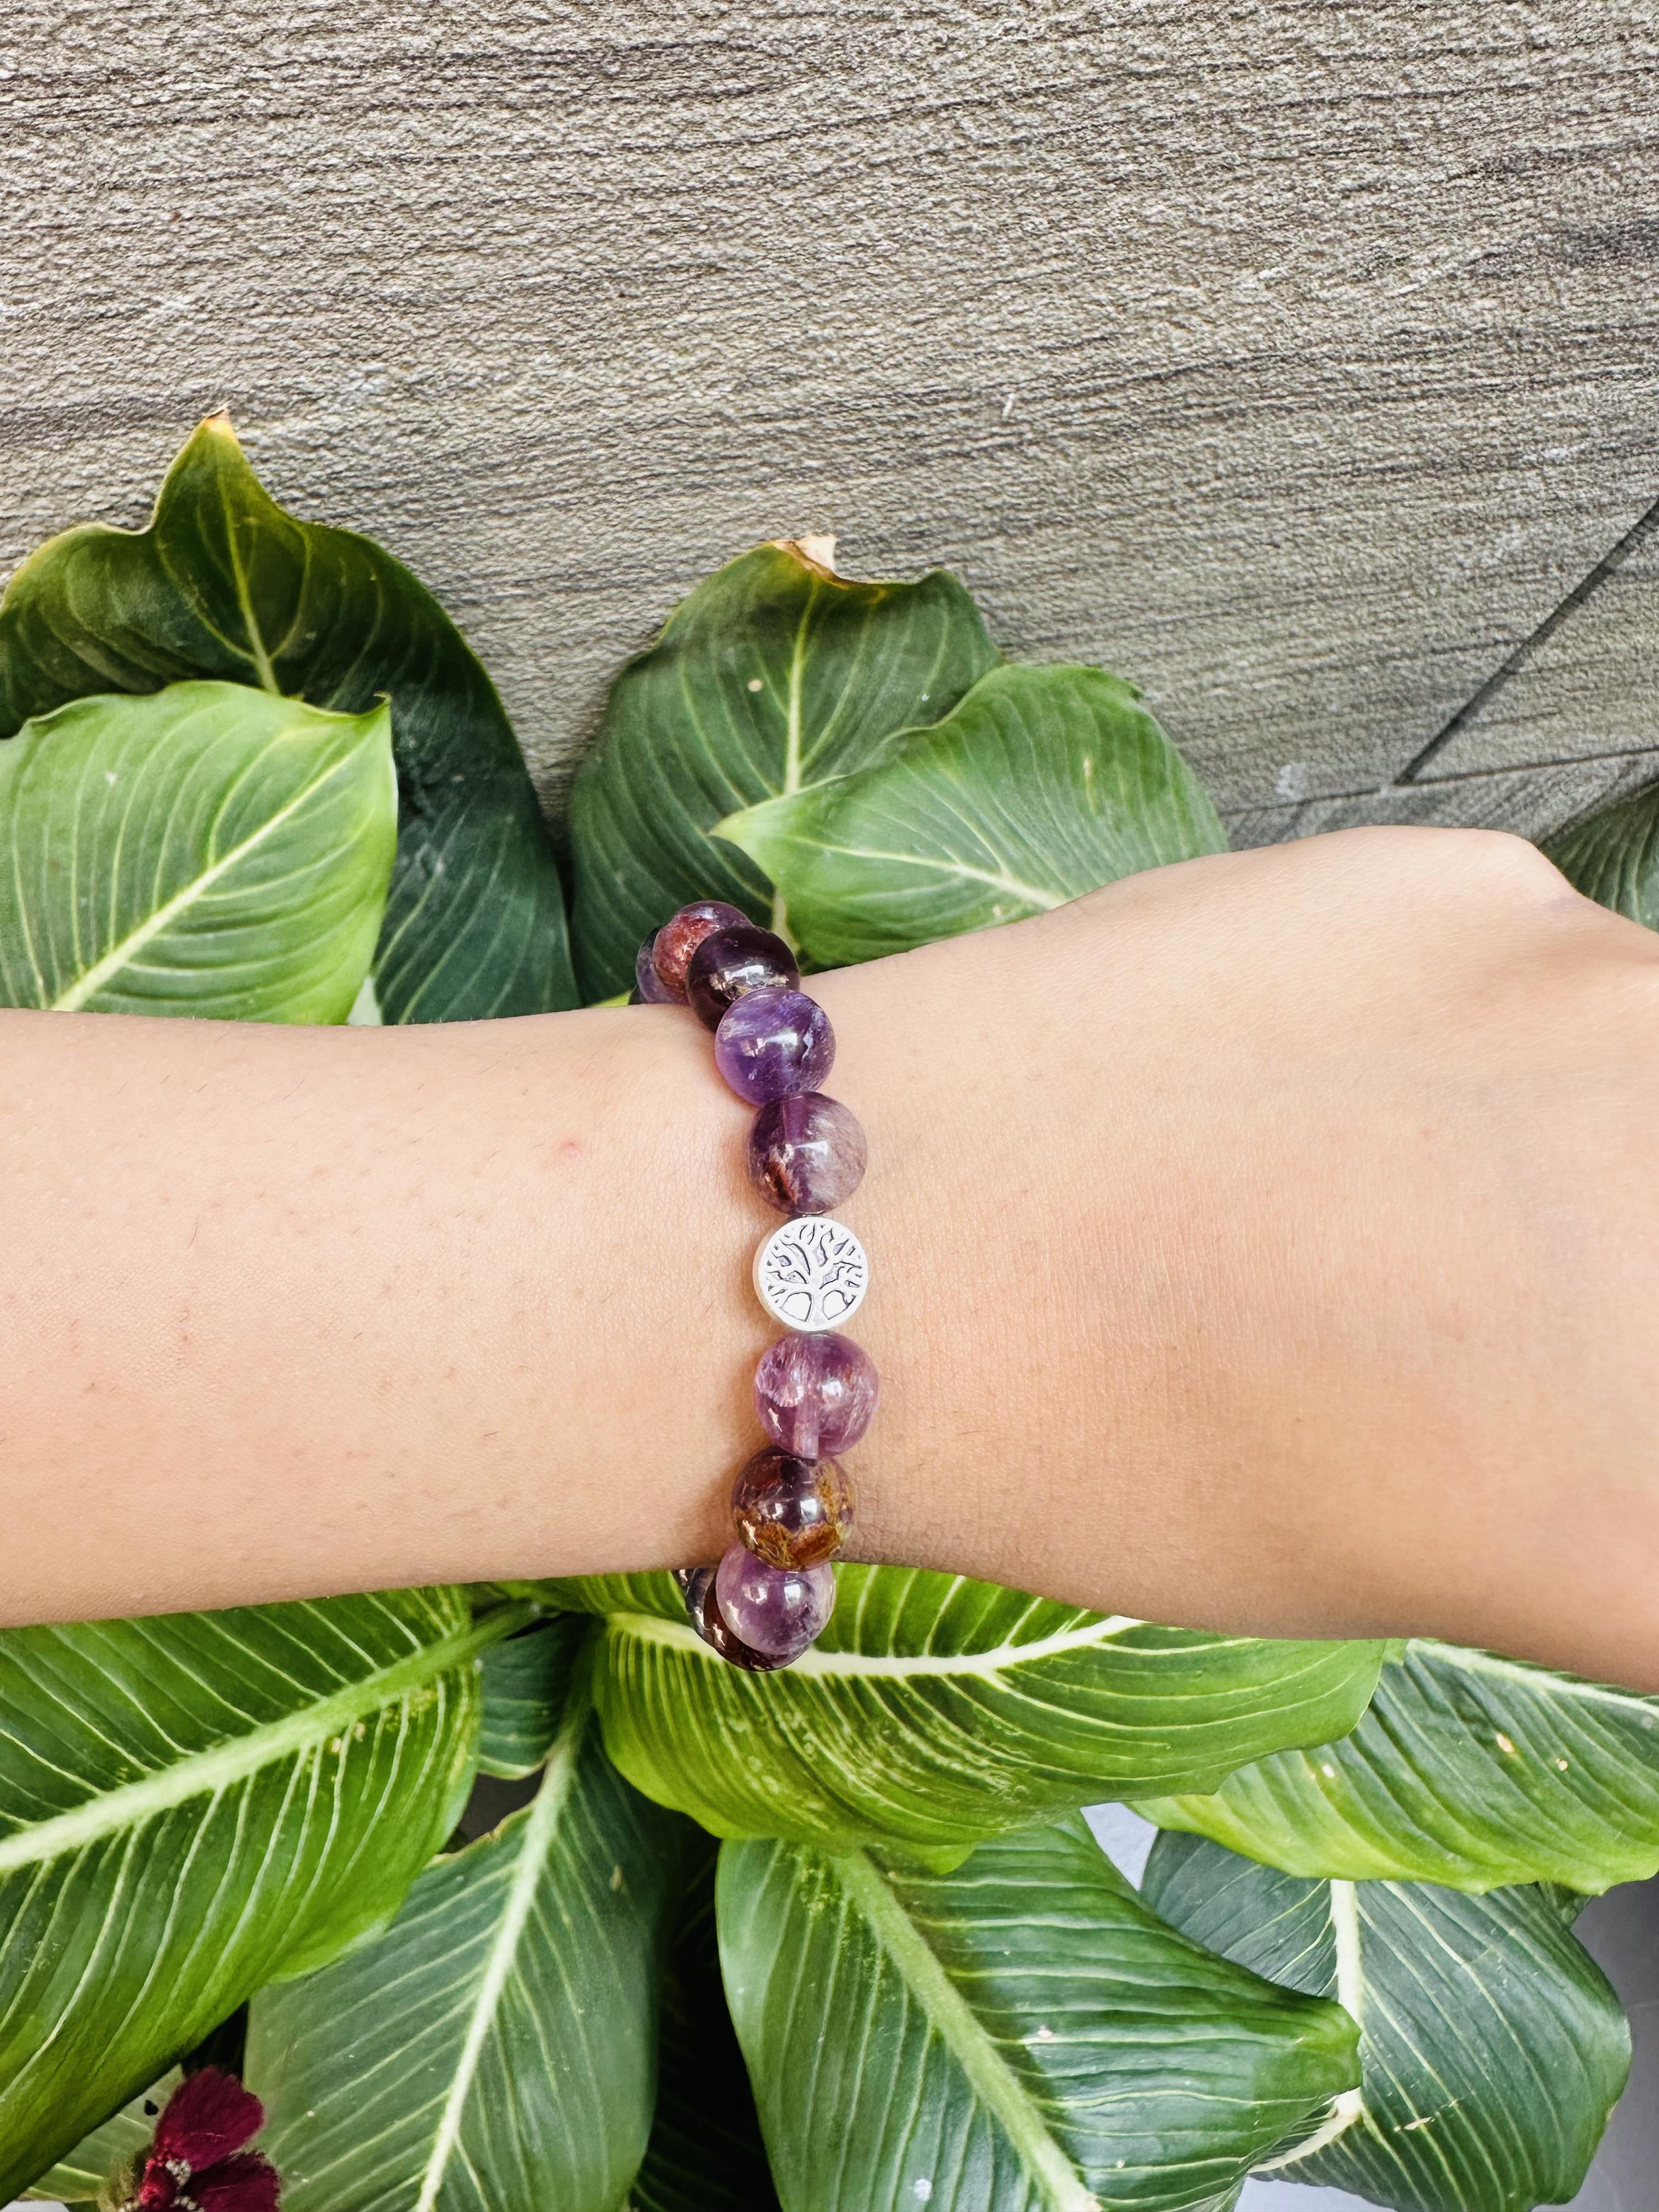 KittyKat Jewelry - This is a custom Ametrine bracelet I've been working on  for months. The stone is thick and it took a while to figure out how to  attach it securely